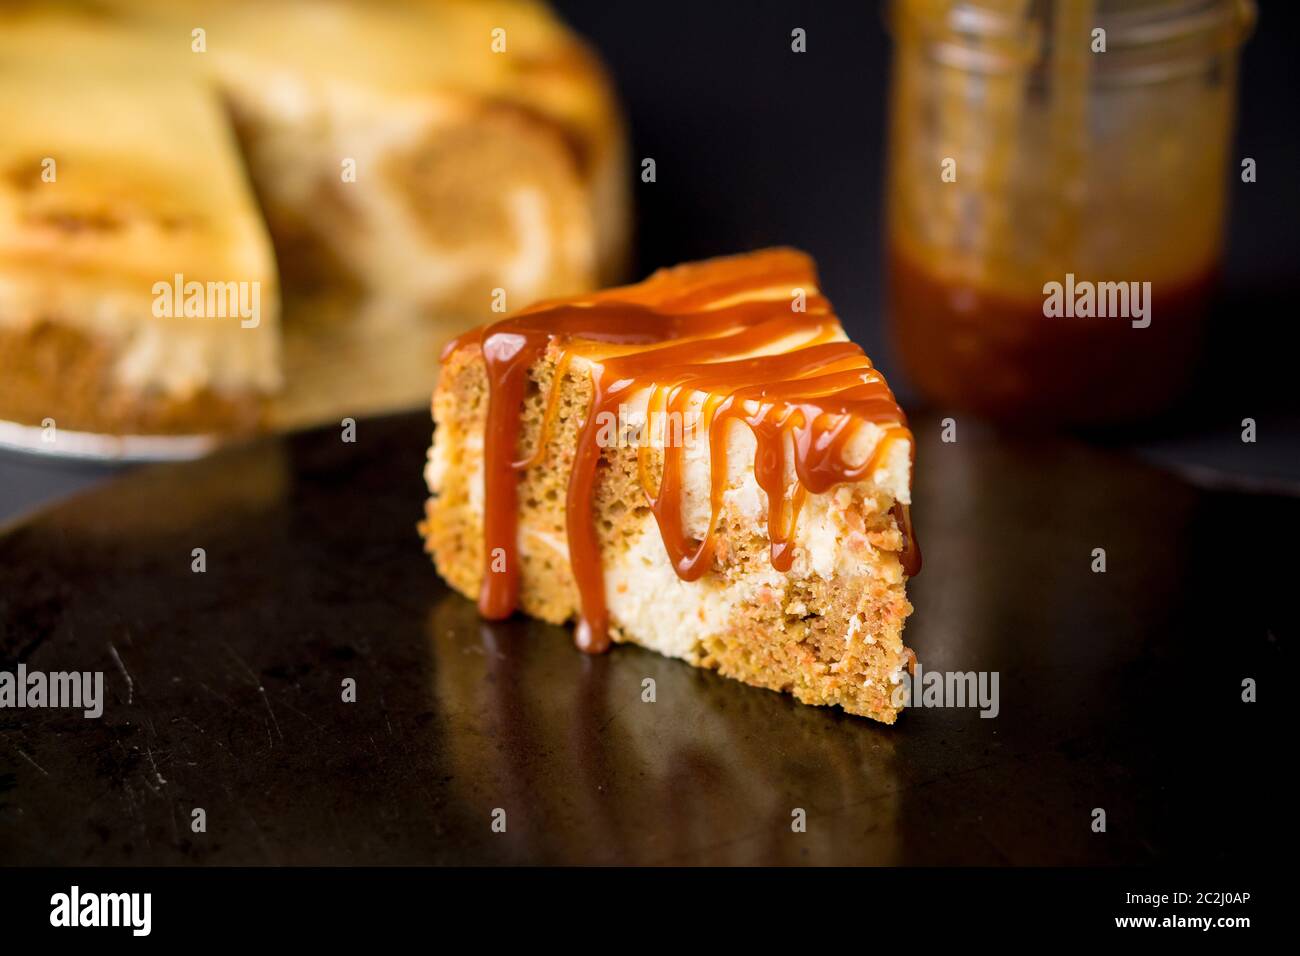 Slice of marble cake that is a mix of carrot cake and cheesecake swirled together and topped with caramel sauce. A delicious sweet creamy dessert. Stock Photo